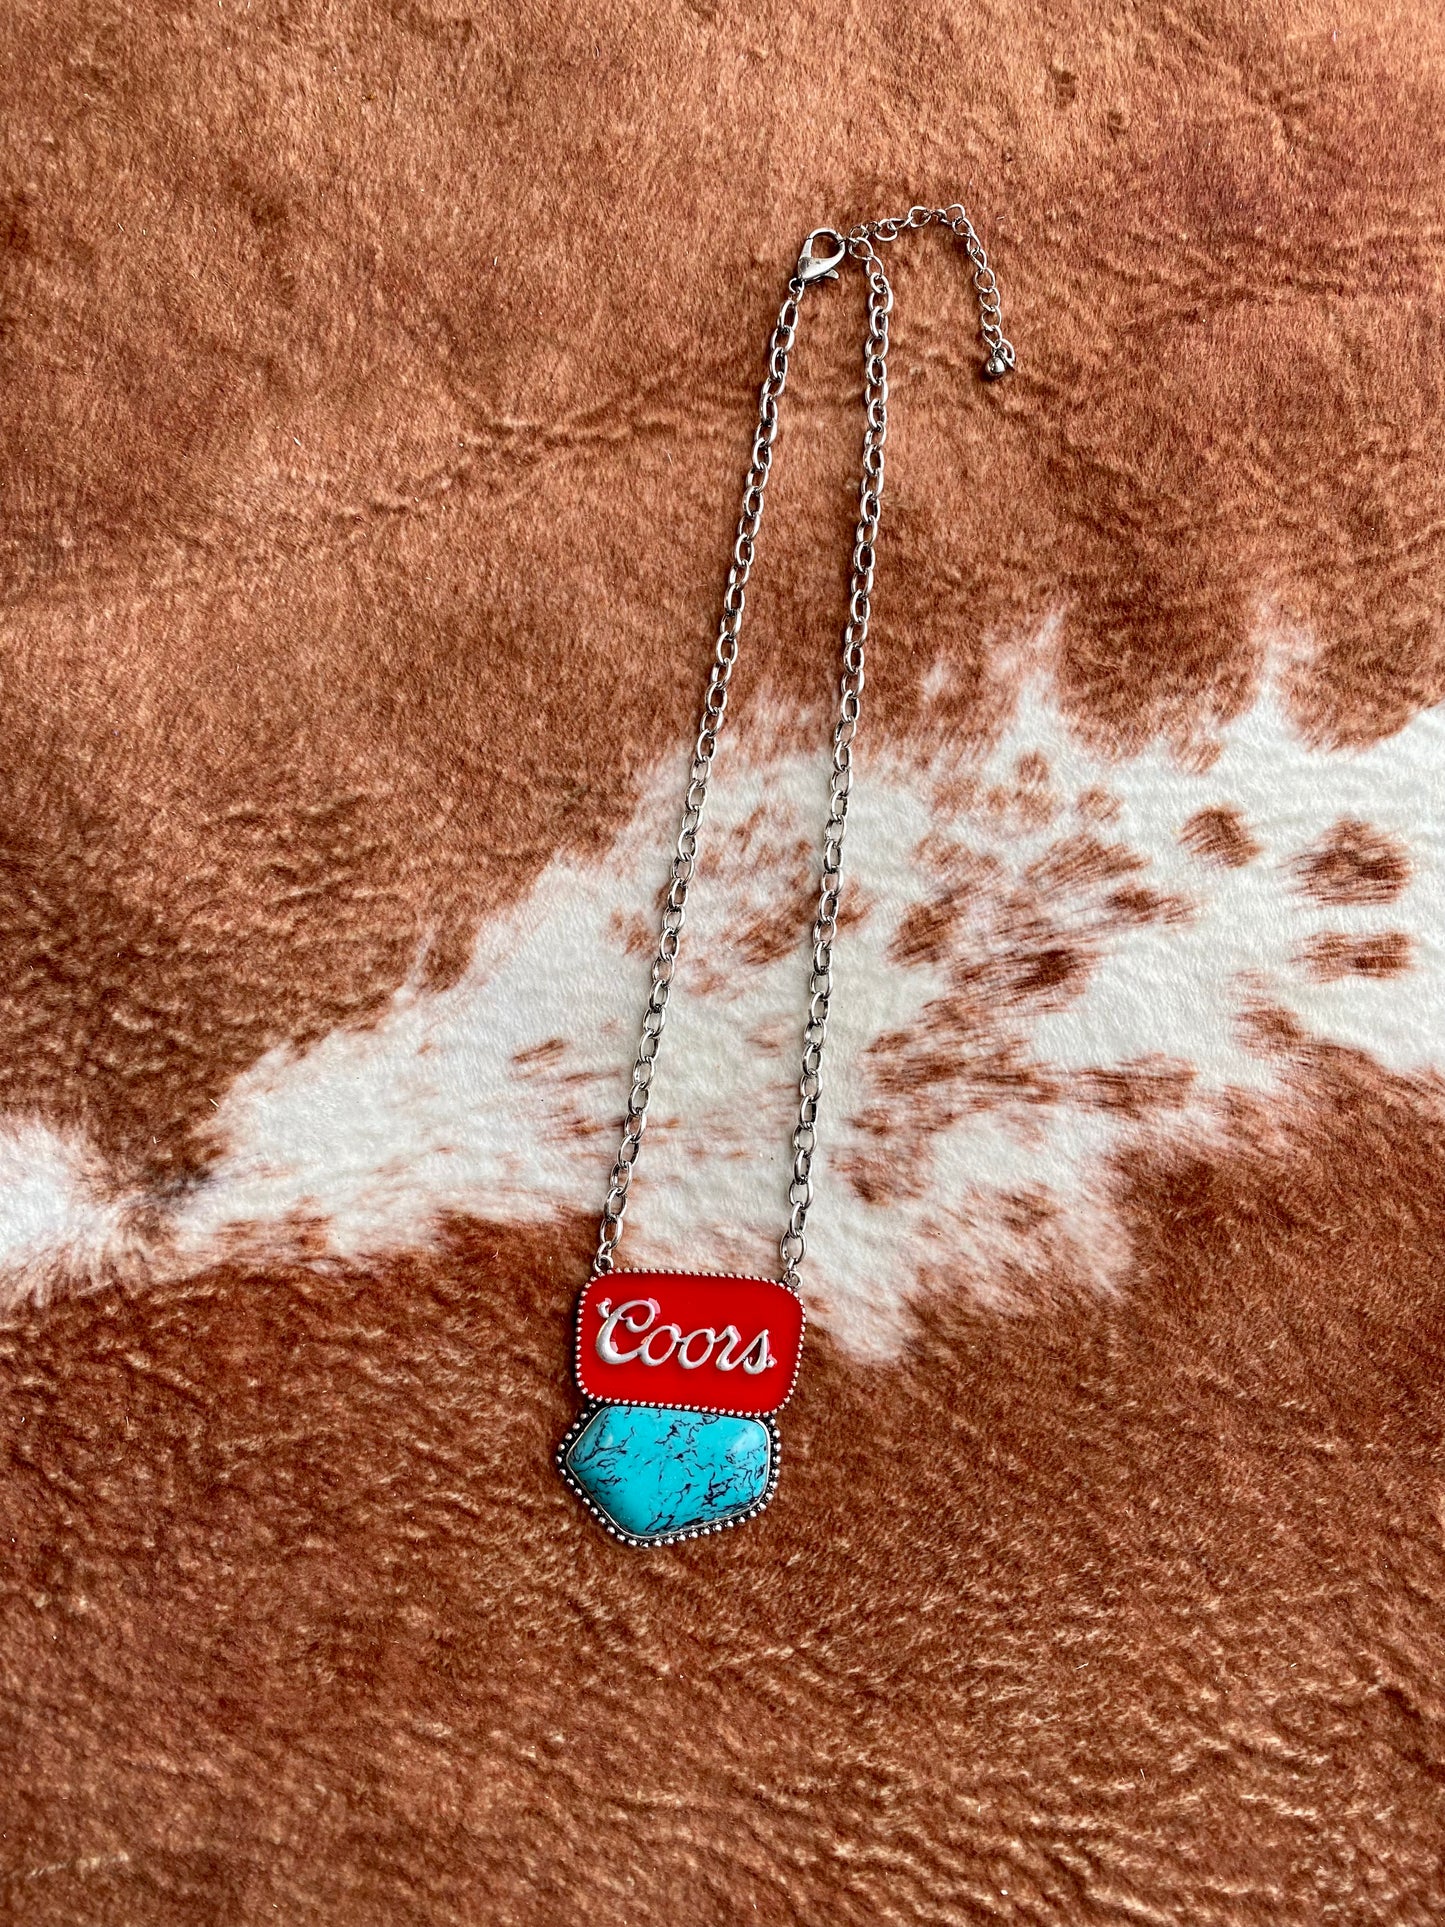 Coors Stone Necklace